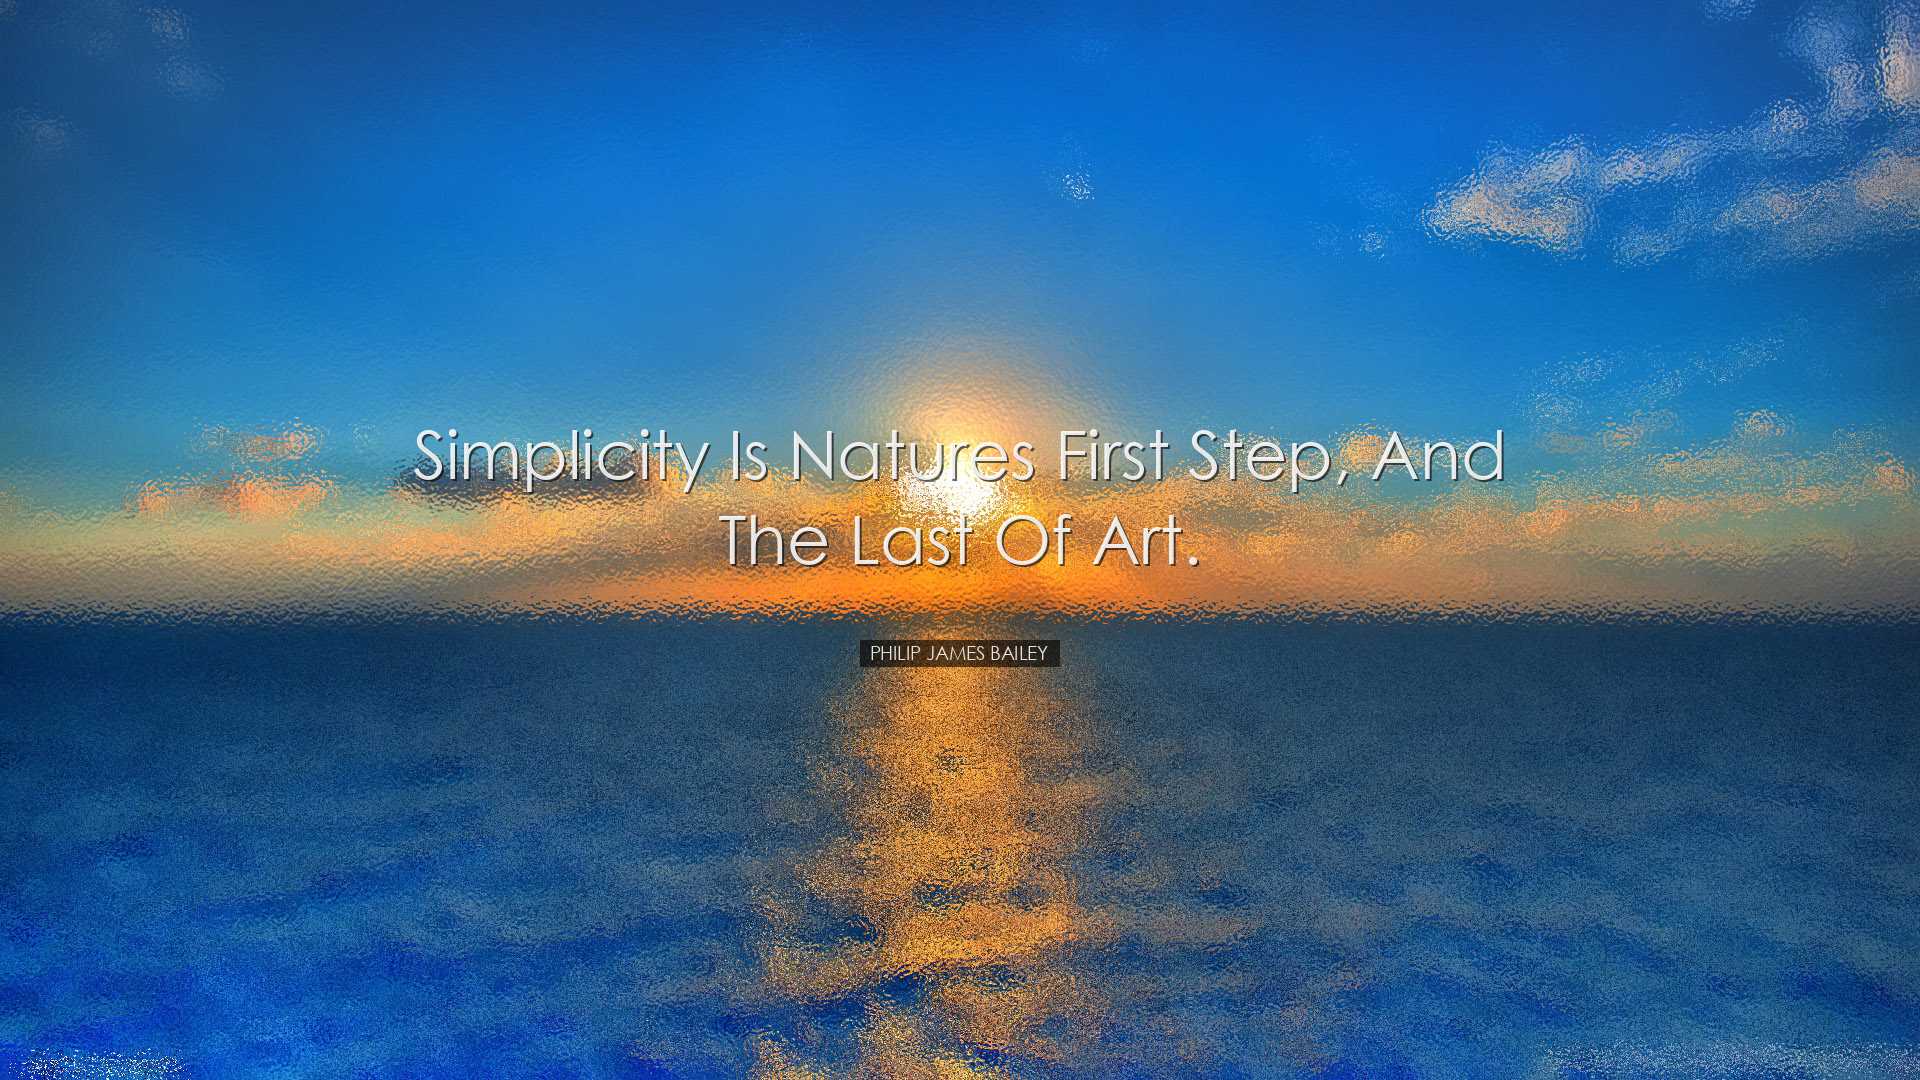 Simplicity is natures first step, and the last of art. - Philip Ja